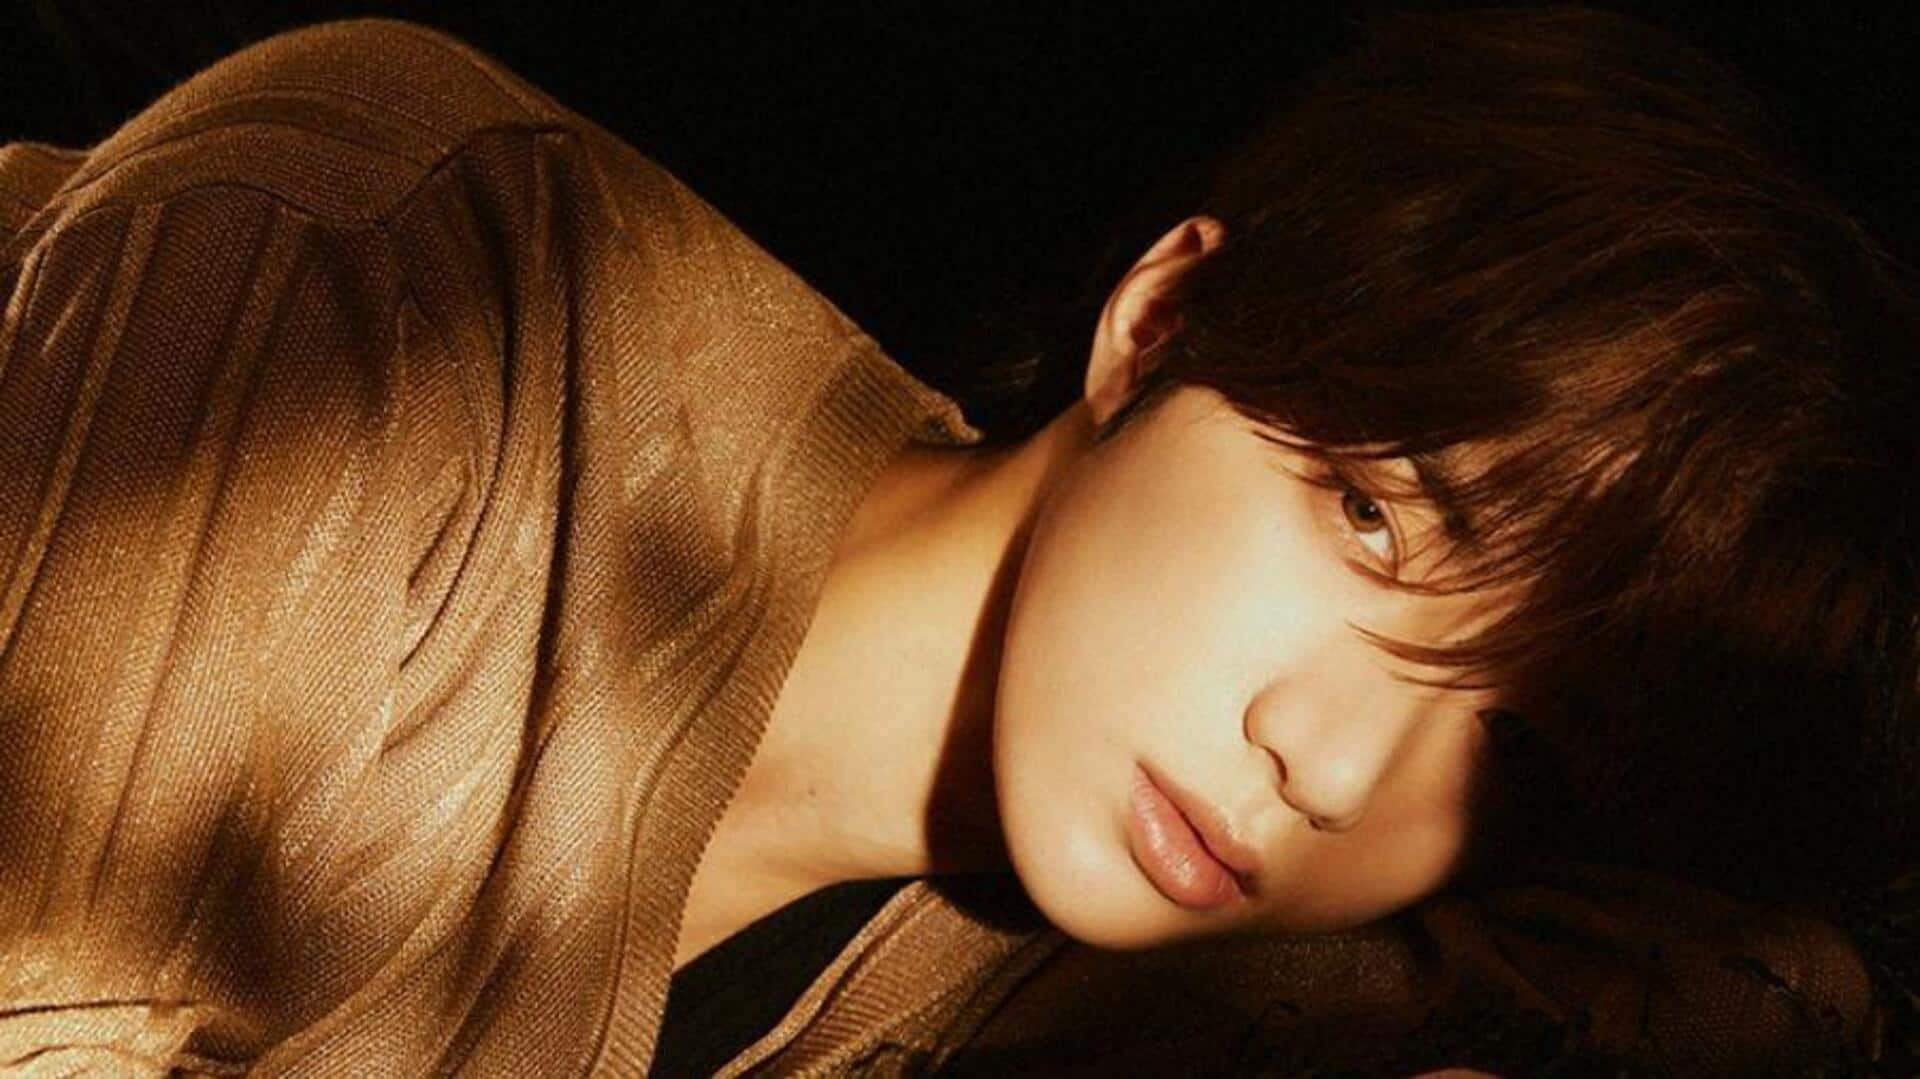 K-pop: TXT's Beomgyu joins Instagram; shares first post